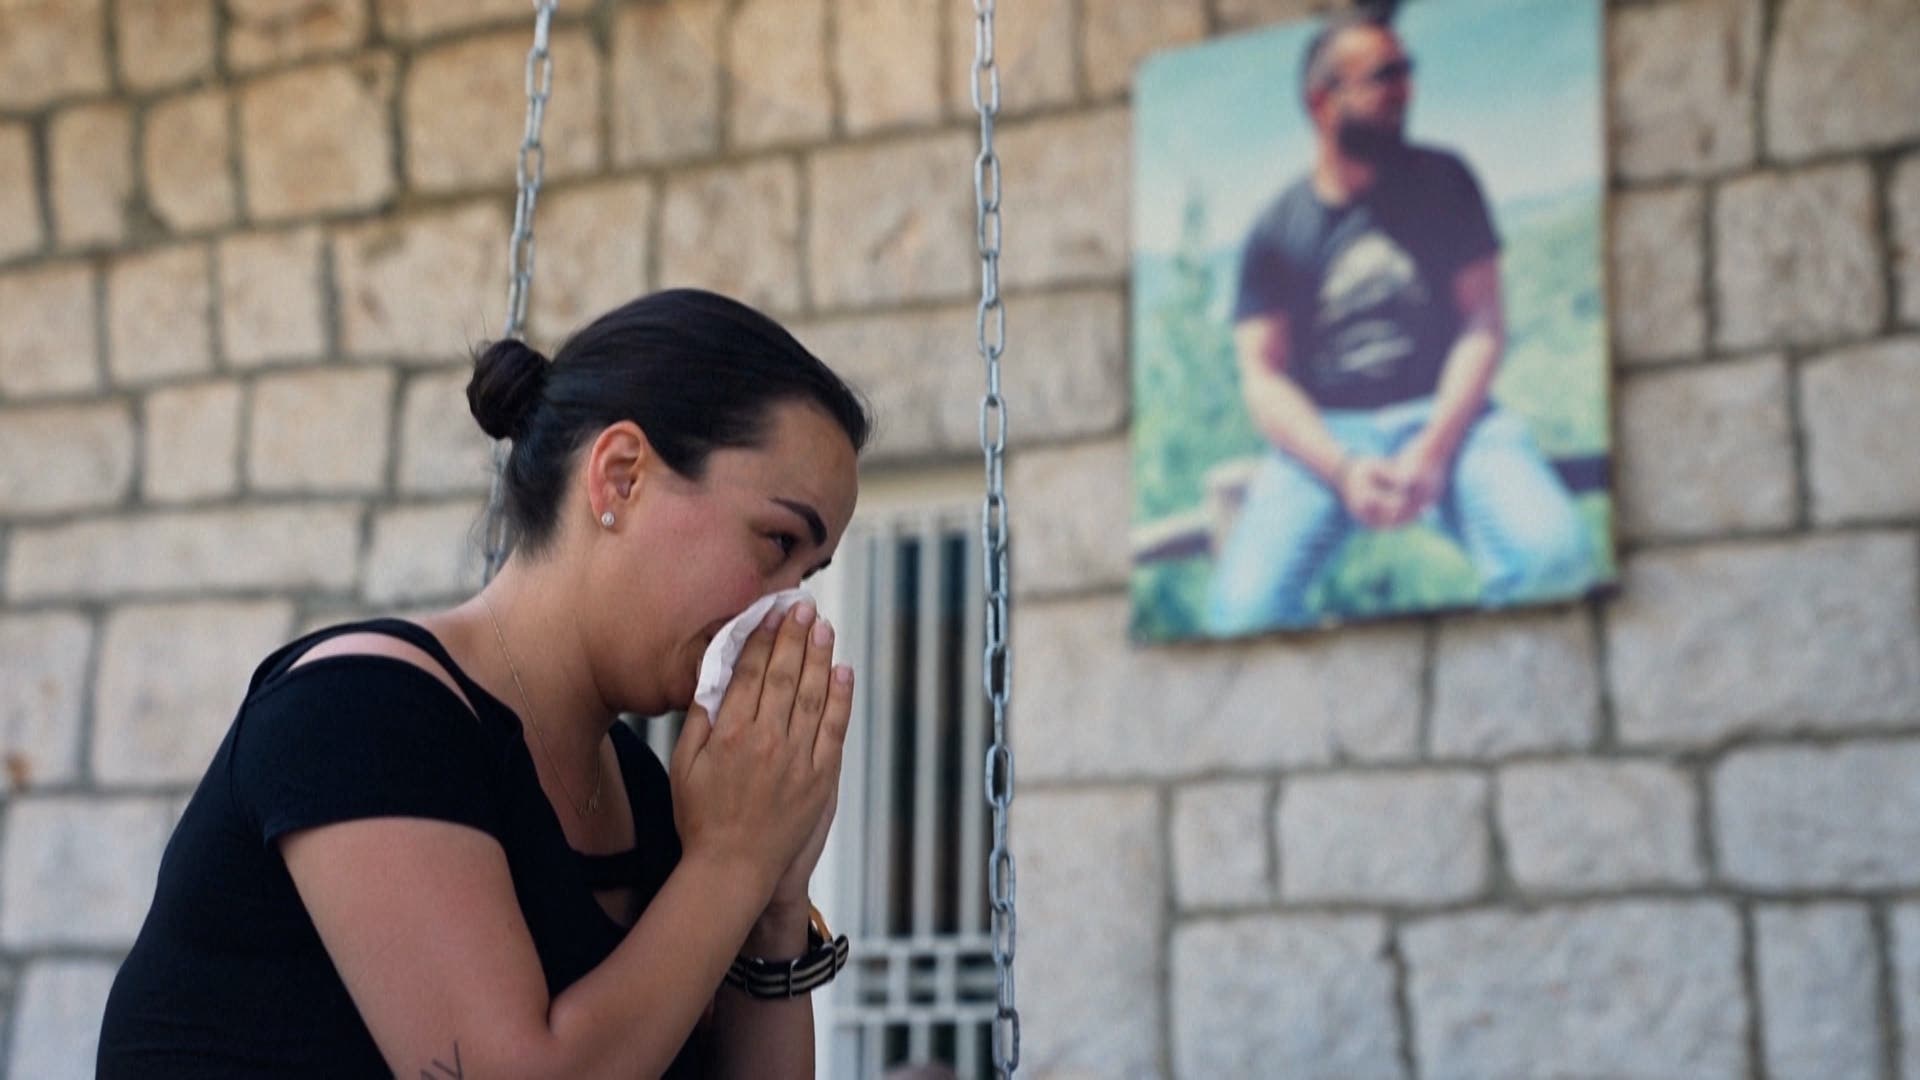 A year on, Lebanon family torn apart by Beirut blast seeks justice. (File photo)